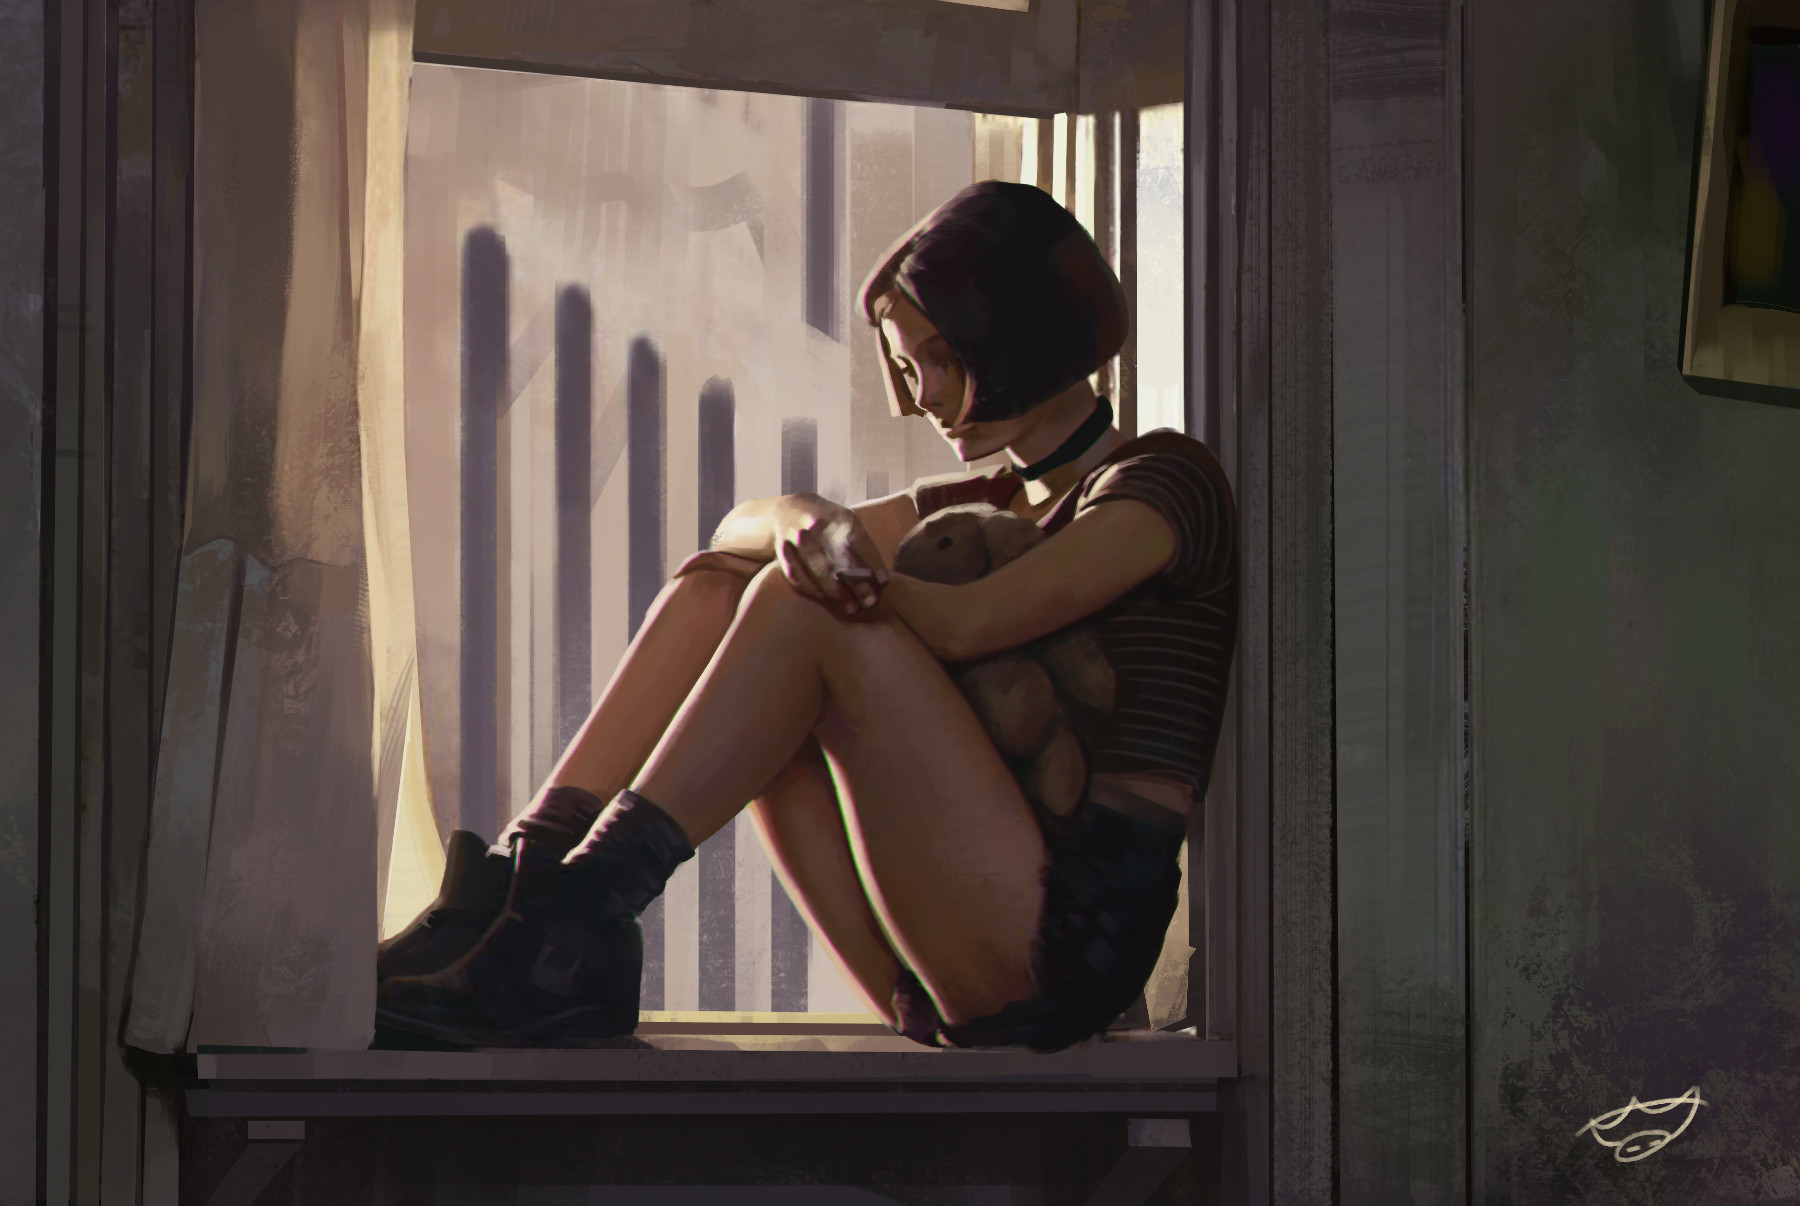 Sloth Being Artist Sitting Legs Together Teddy Bears Cigarettes Choker Short Hair By The Window T Sh 1800x1206